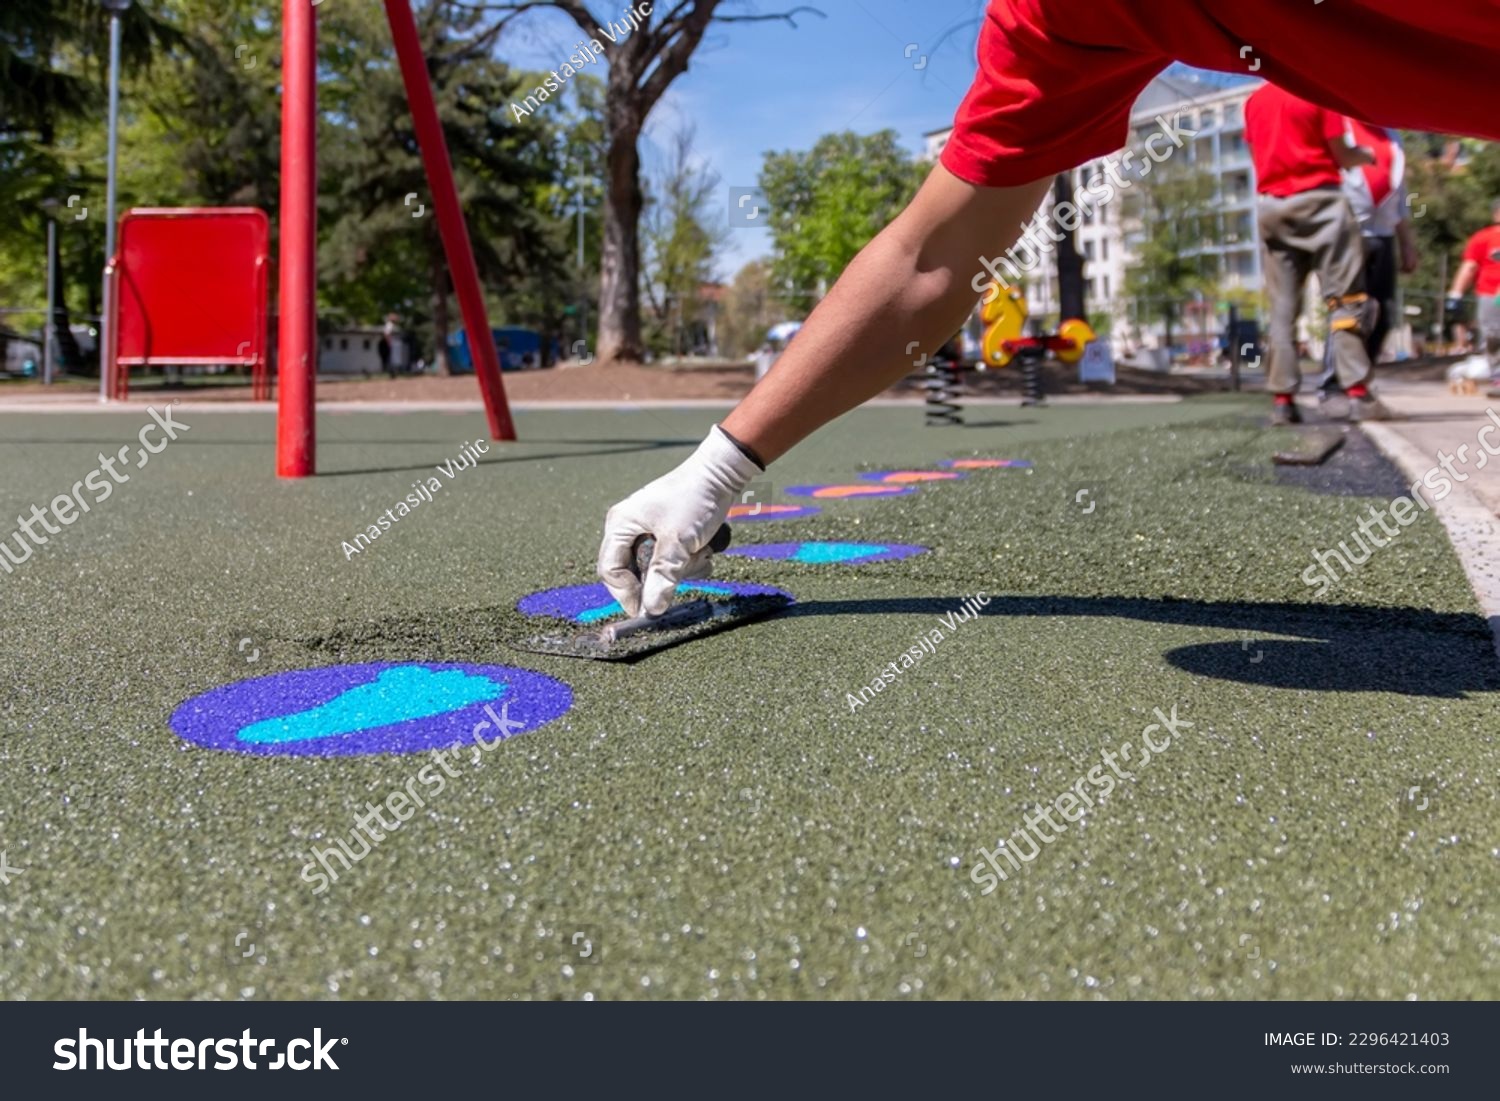 A mason hand with trowel  spreading and leveling soft rubber crumbs rubber mulch 
for children's playground. Outdoor soft coating and floor covering for sports. Rubber surface for safety. #2296421403